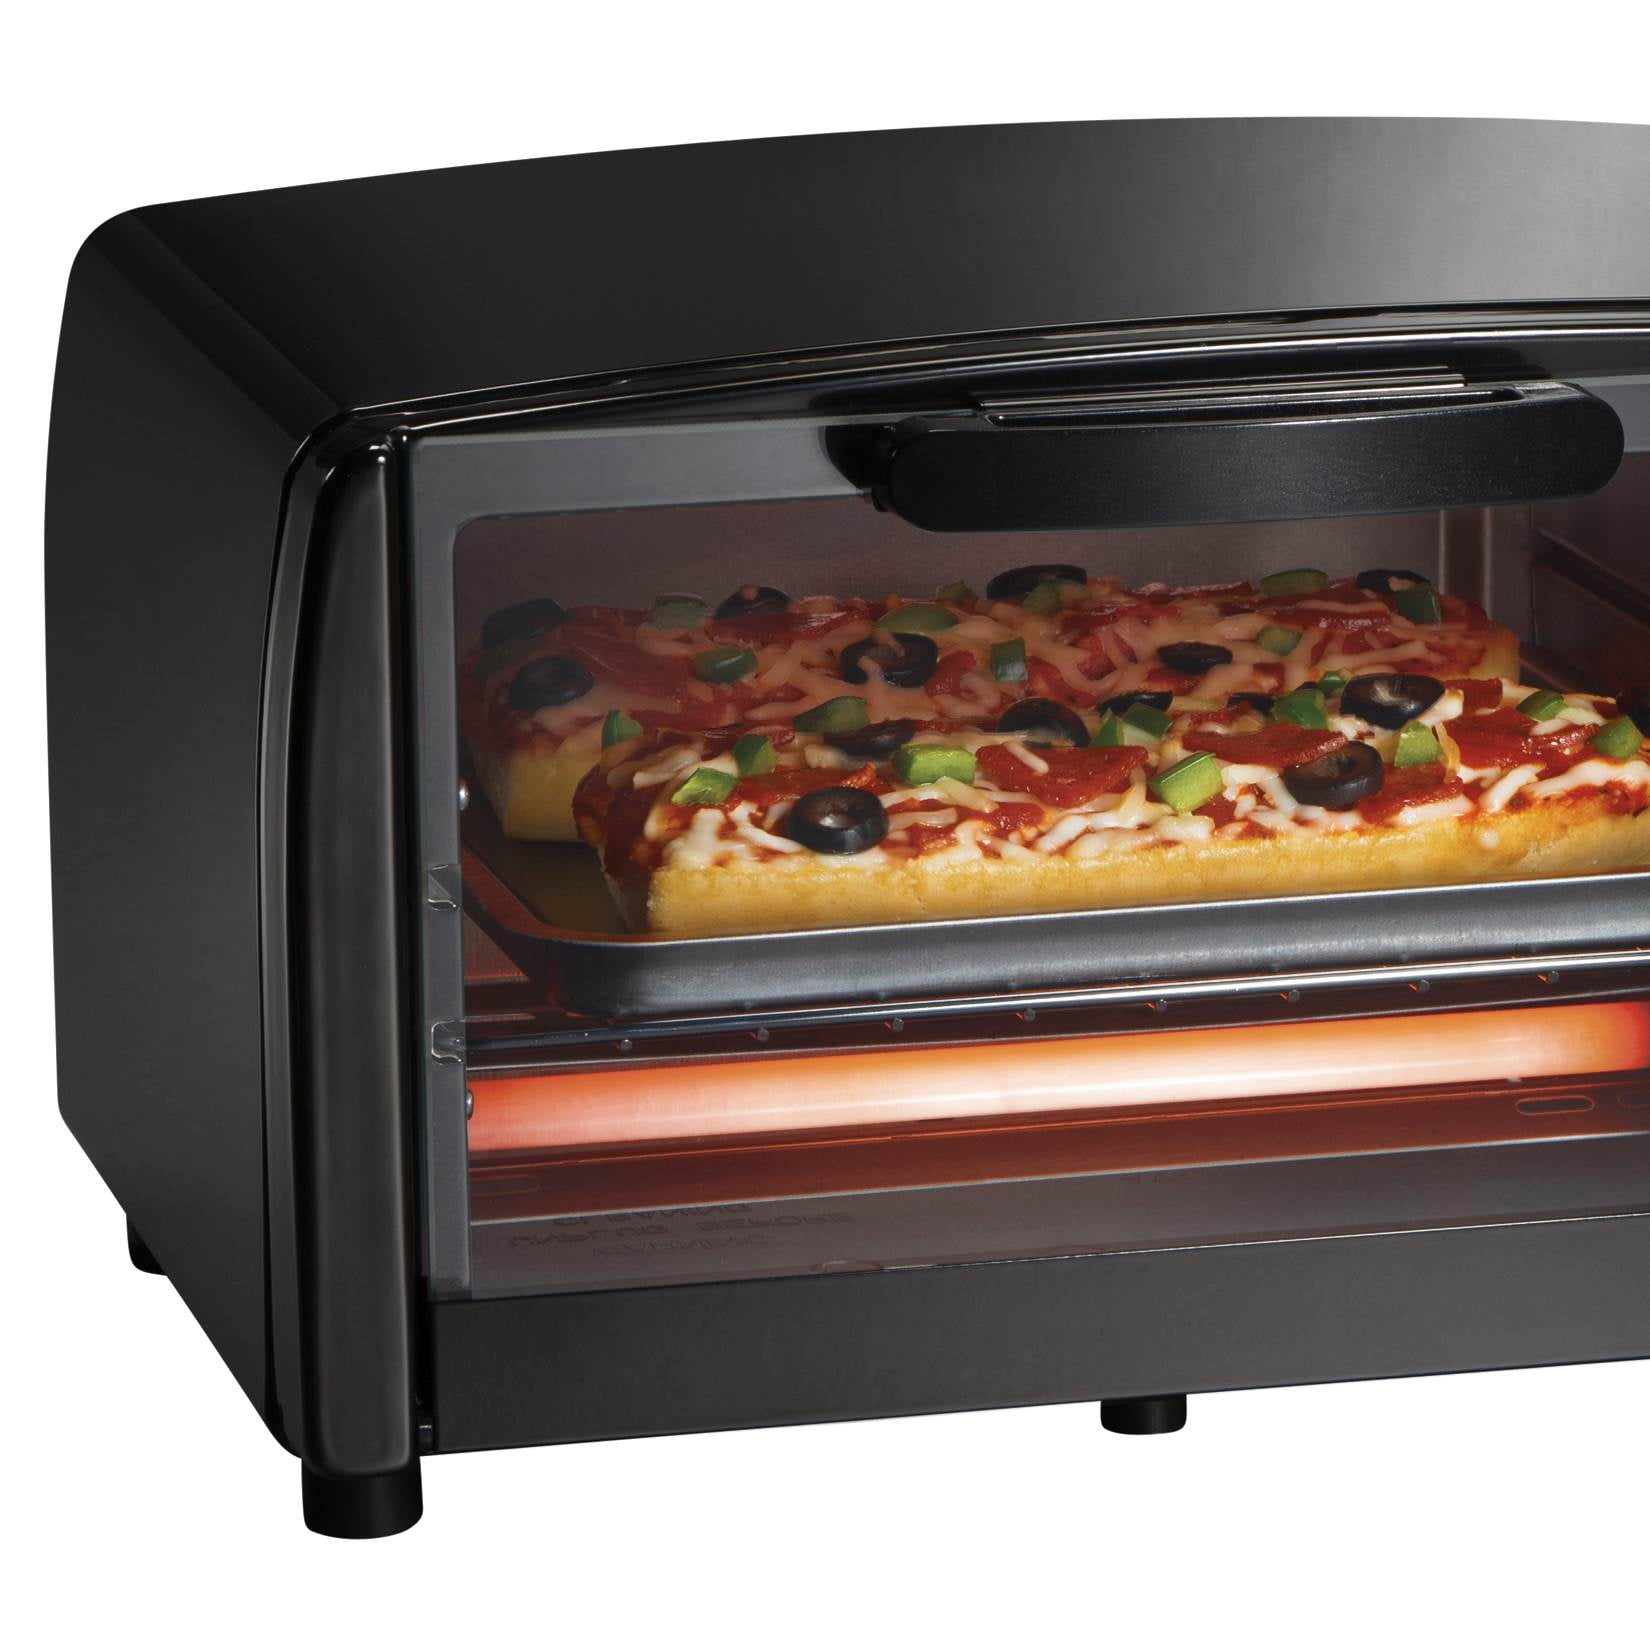 31116PS  Proctor Silex Toaster Oven: 4-slice with broil function, white –  Healthy Bear Cookware